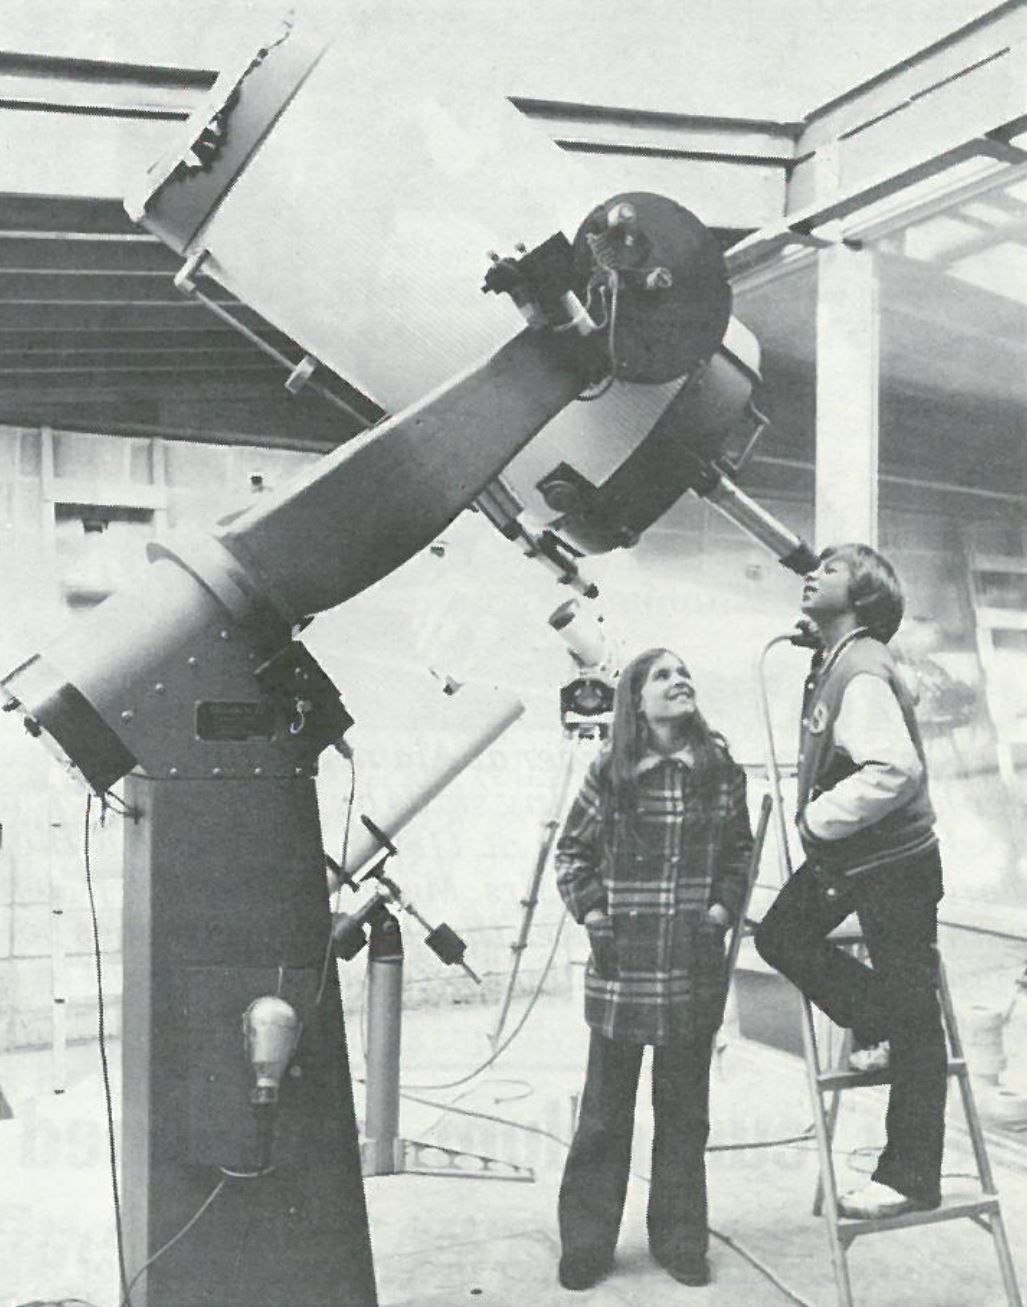 Students in the 1970's Looking Through the Telescope